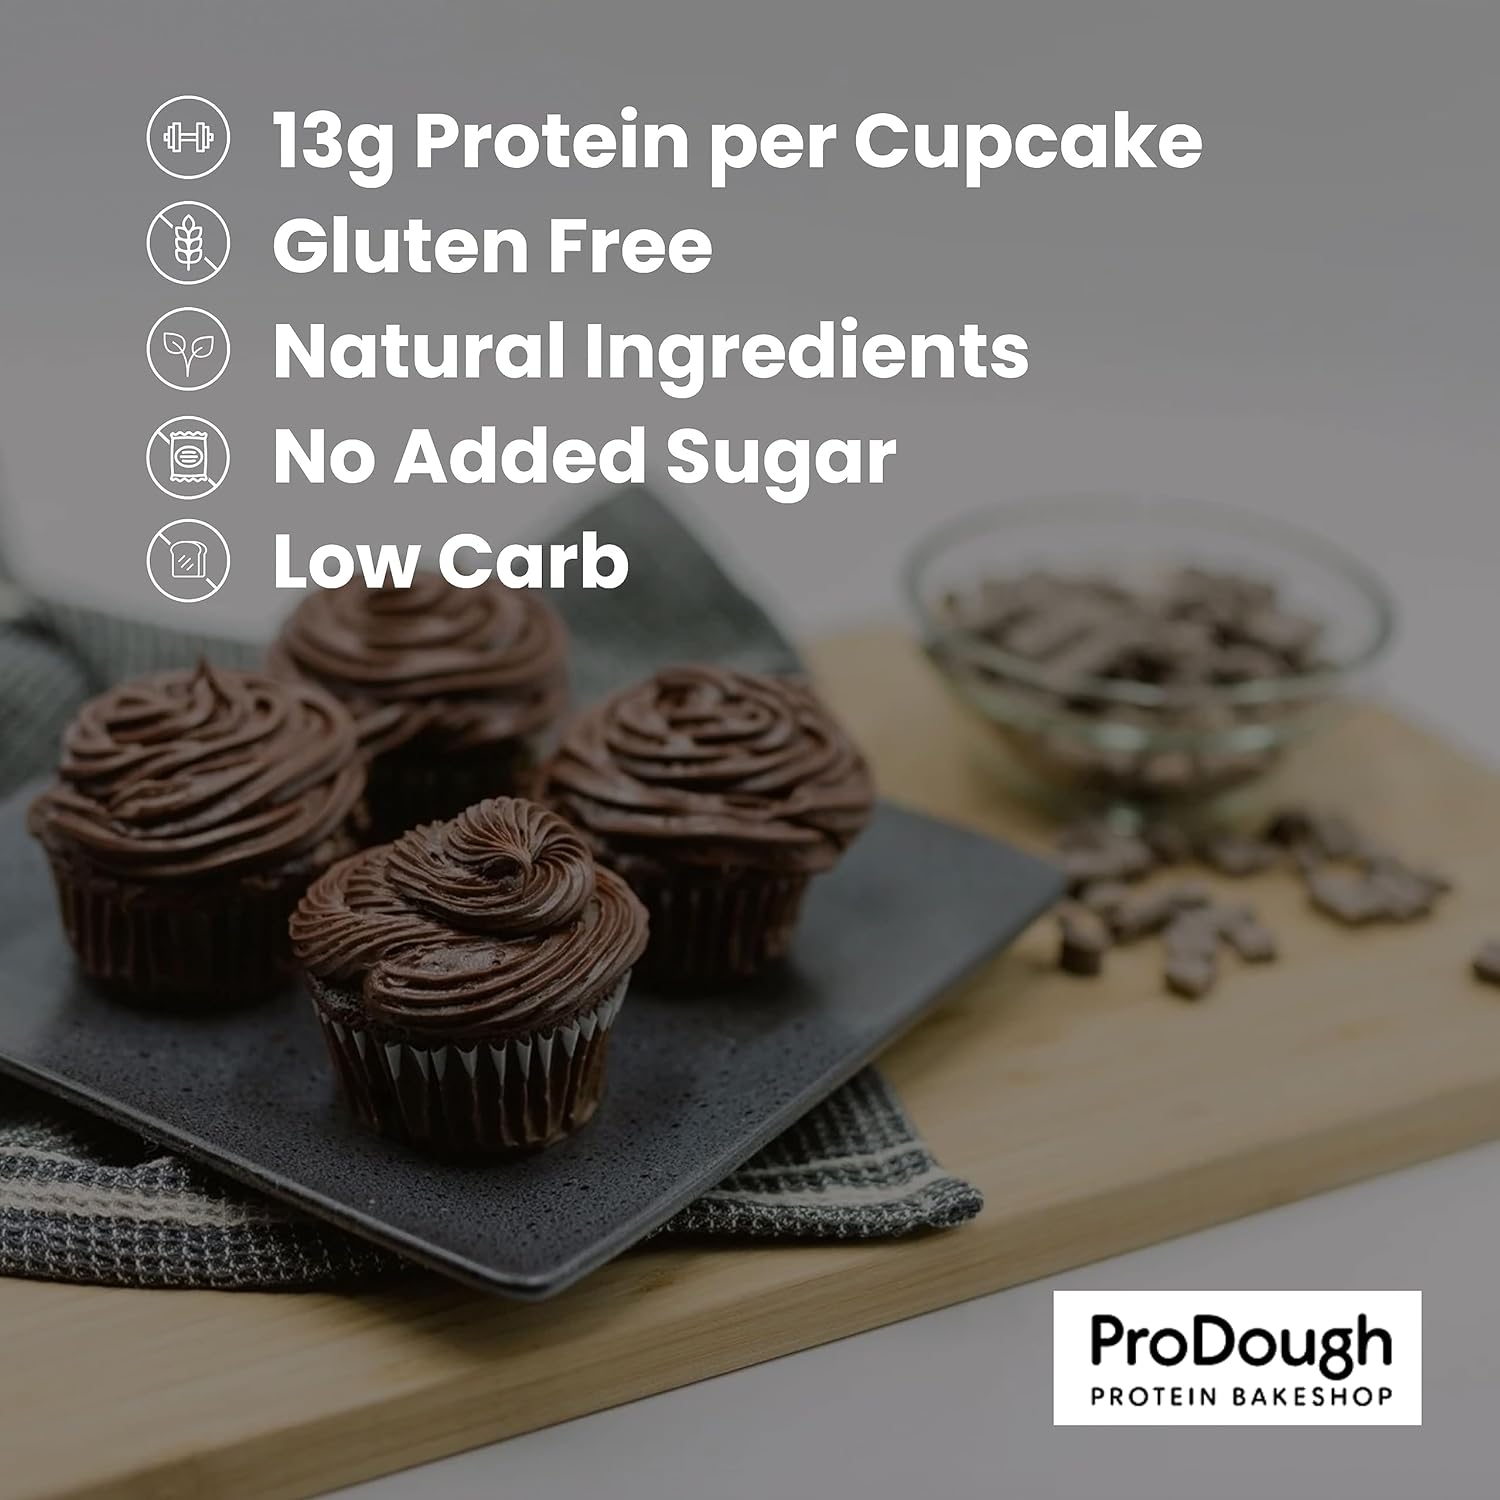 ProDough High Protein- Gluten Free Cupcake Mix, Low Carb, 13g of Protein per Cupcake, No Added Sugars, Keto Friendly, Makes 12, Healthy Dessert (Chocolate) : Grocery & Gourmet Food